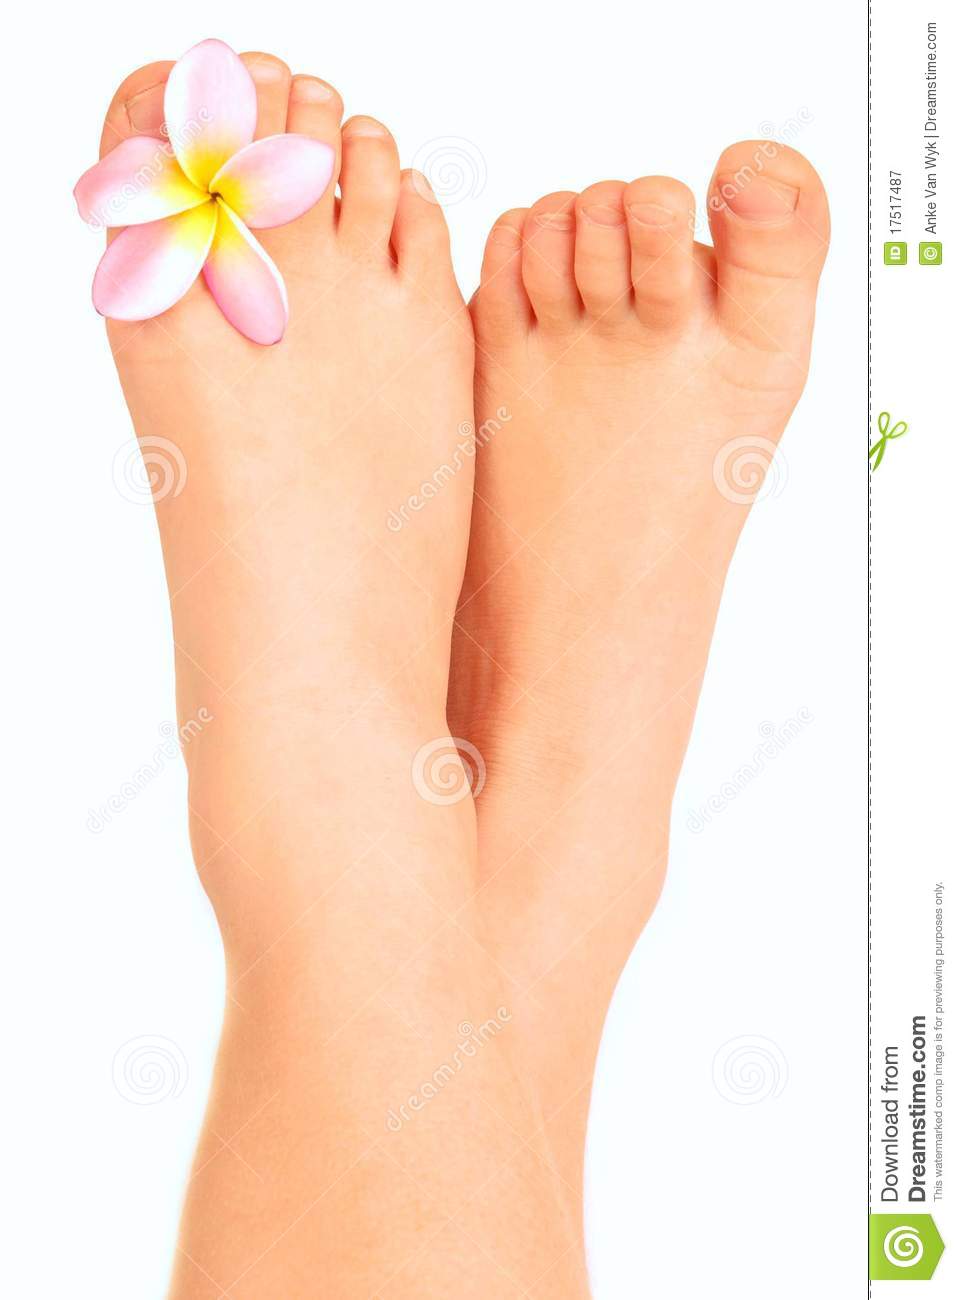 Two Little Crossed Feet Of A Caucasian Child With Plumeria Blossom